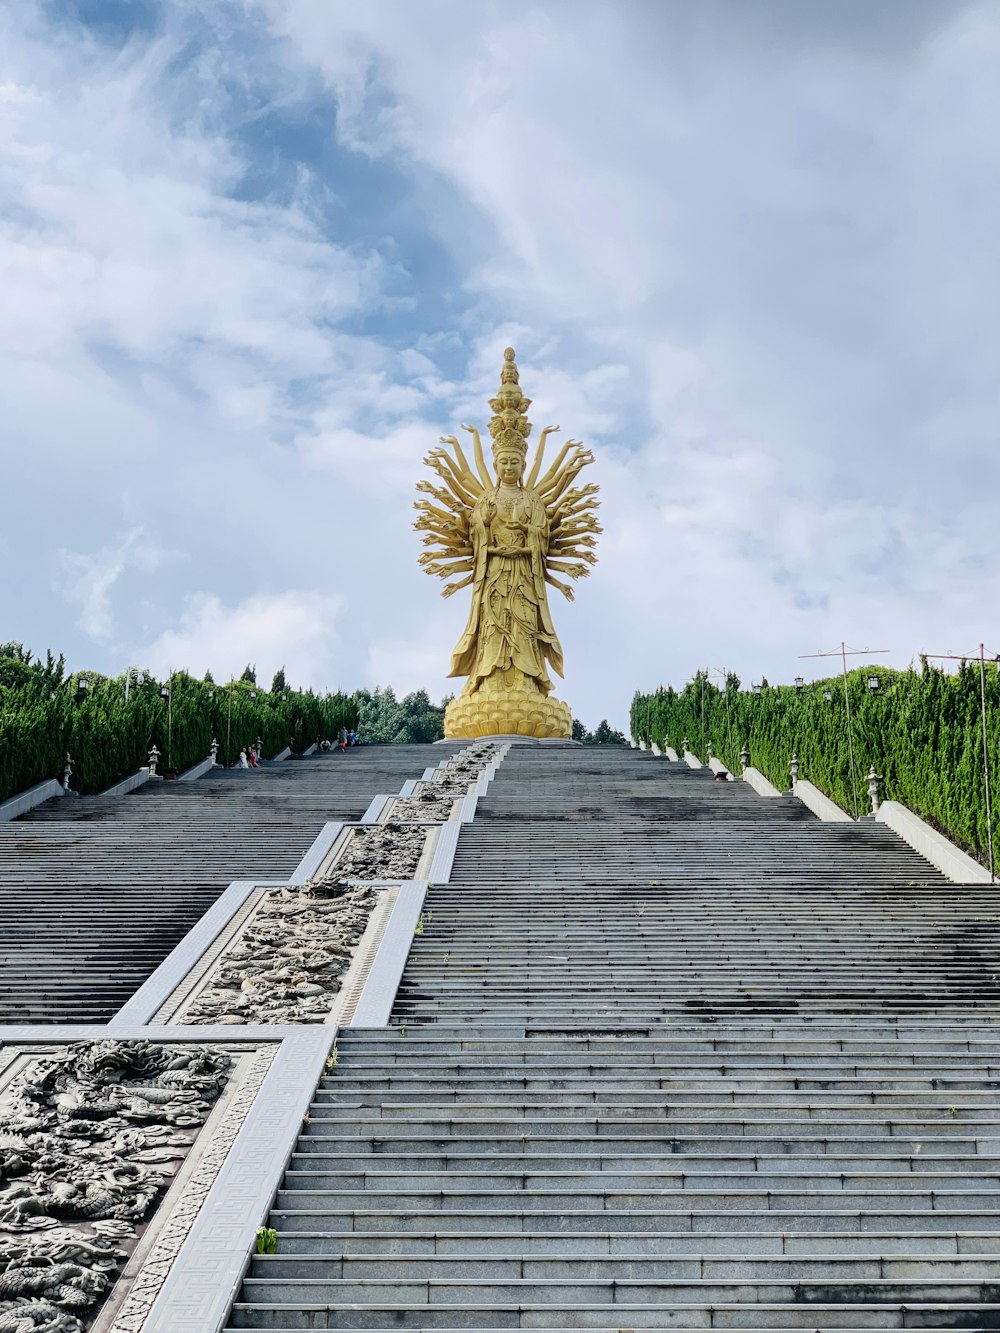 gold statue on wooden dock under cloudy sky during daytime